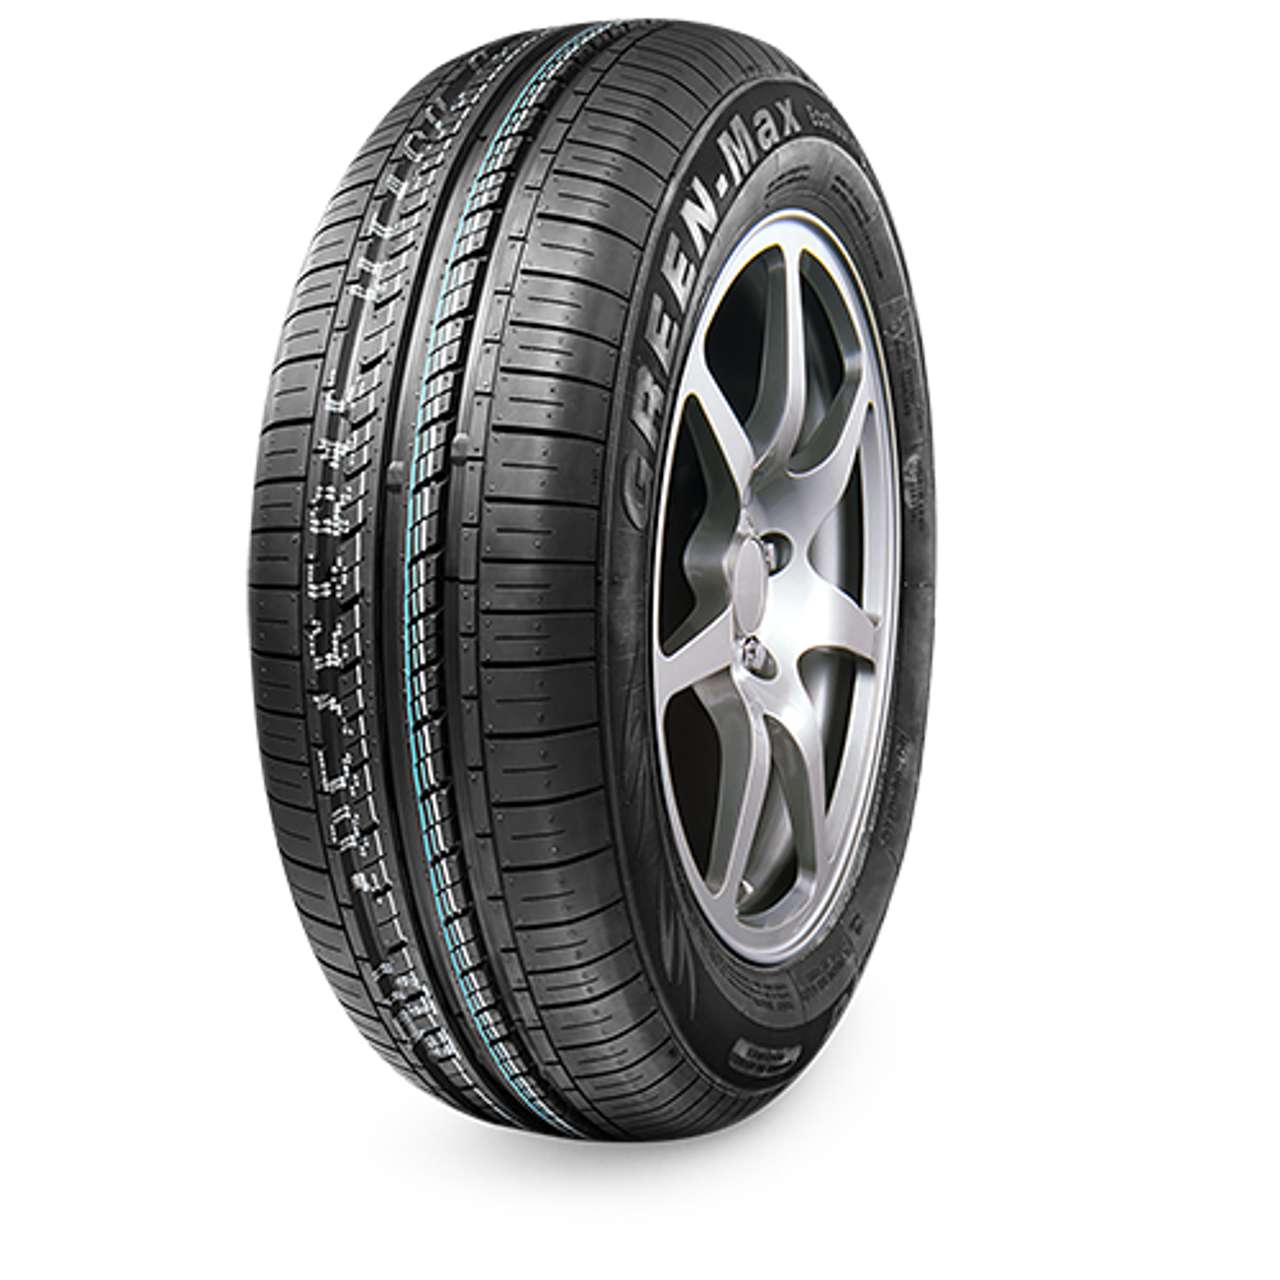 LINGLONG GREEN-MAX ECOTOURING 175/70R14 84T BSW